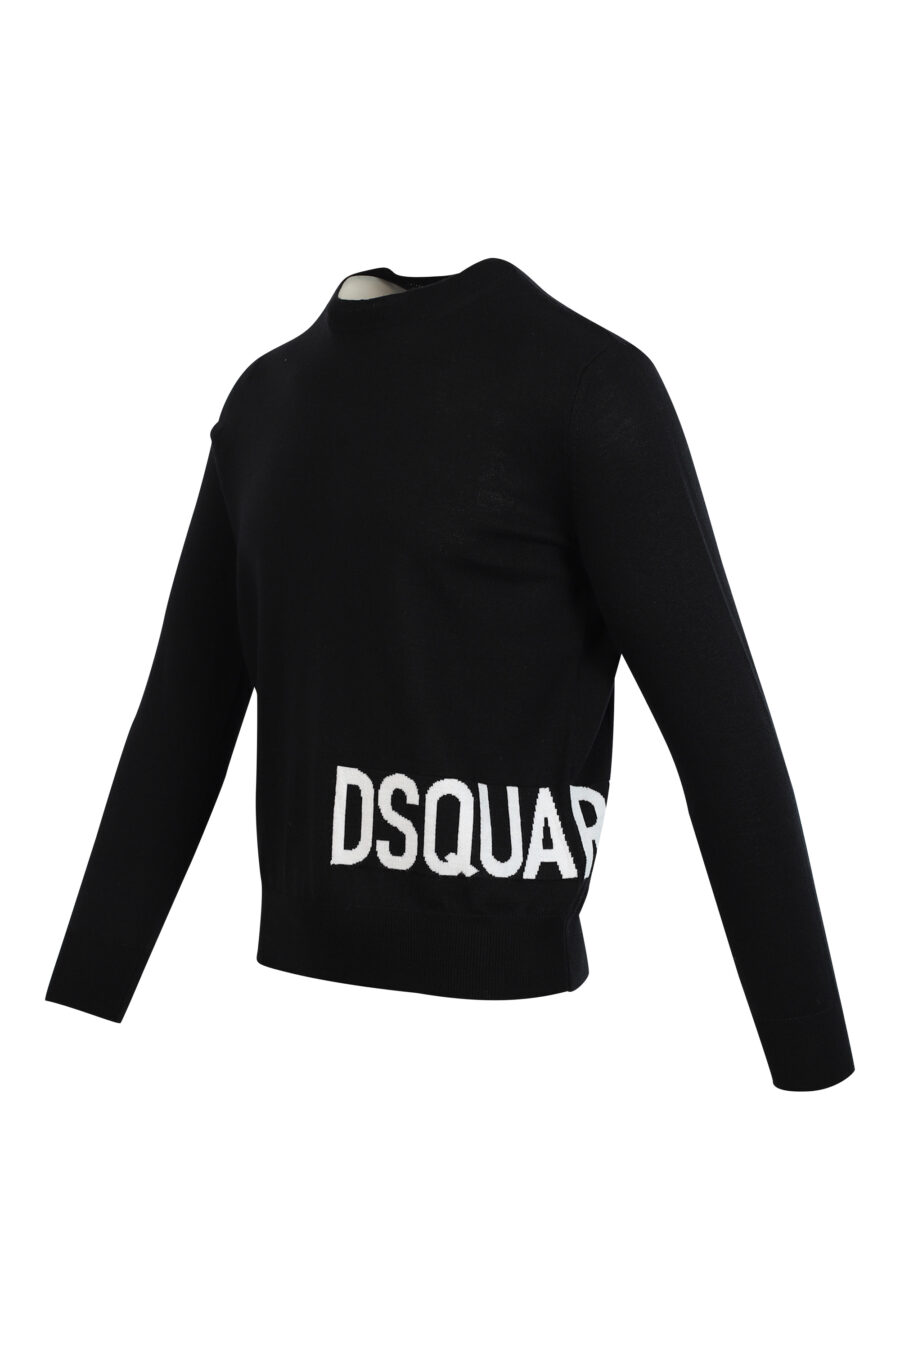 Black jumper with white side maxilogue - 8054148066710 3